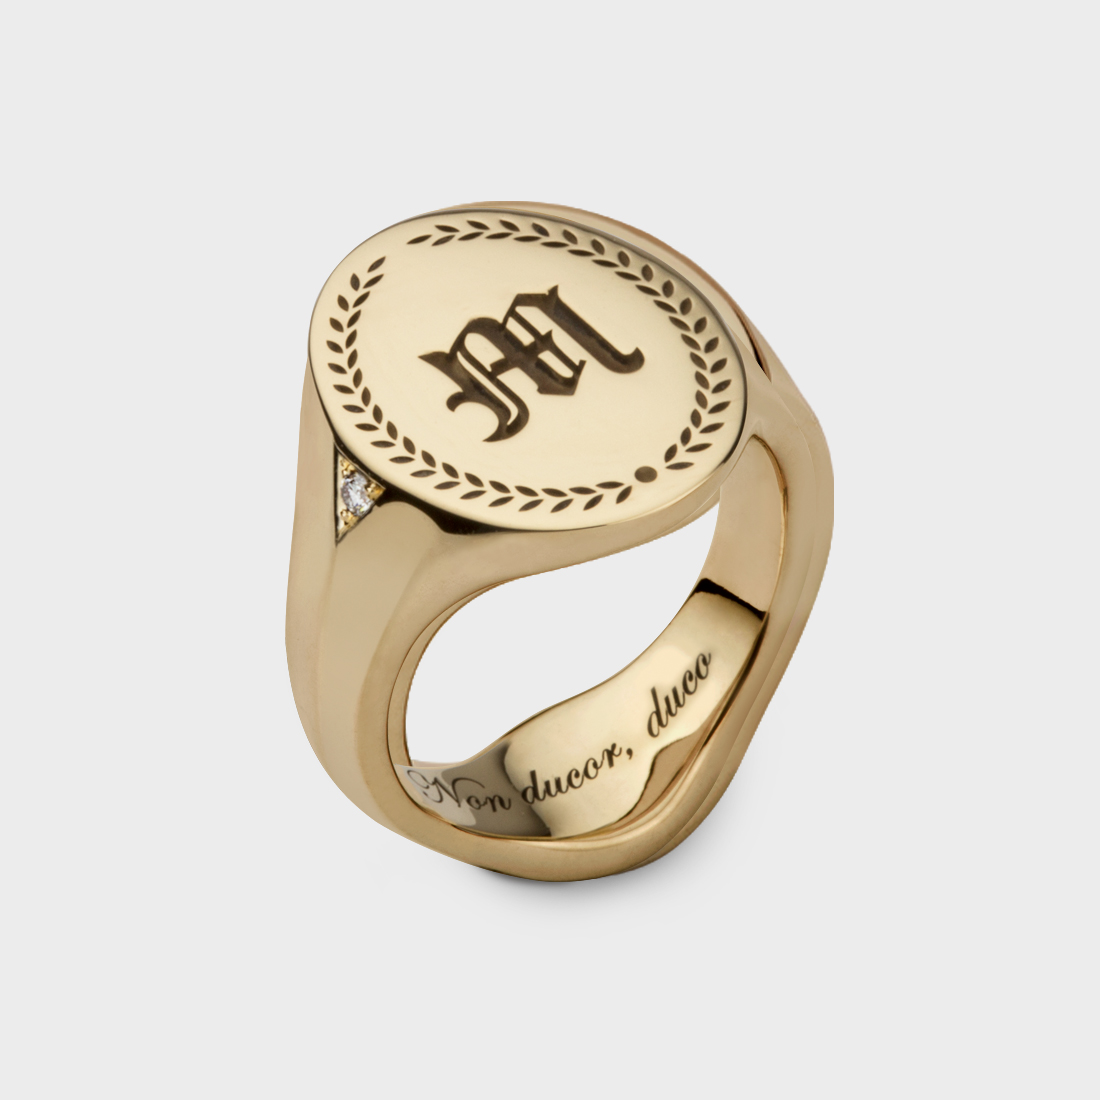 A yellow gold oval ring engraved with the letter M at the top and a pattern around it, with engraving on the inside bottom of the ring and a diamond on the side of the signet.